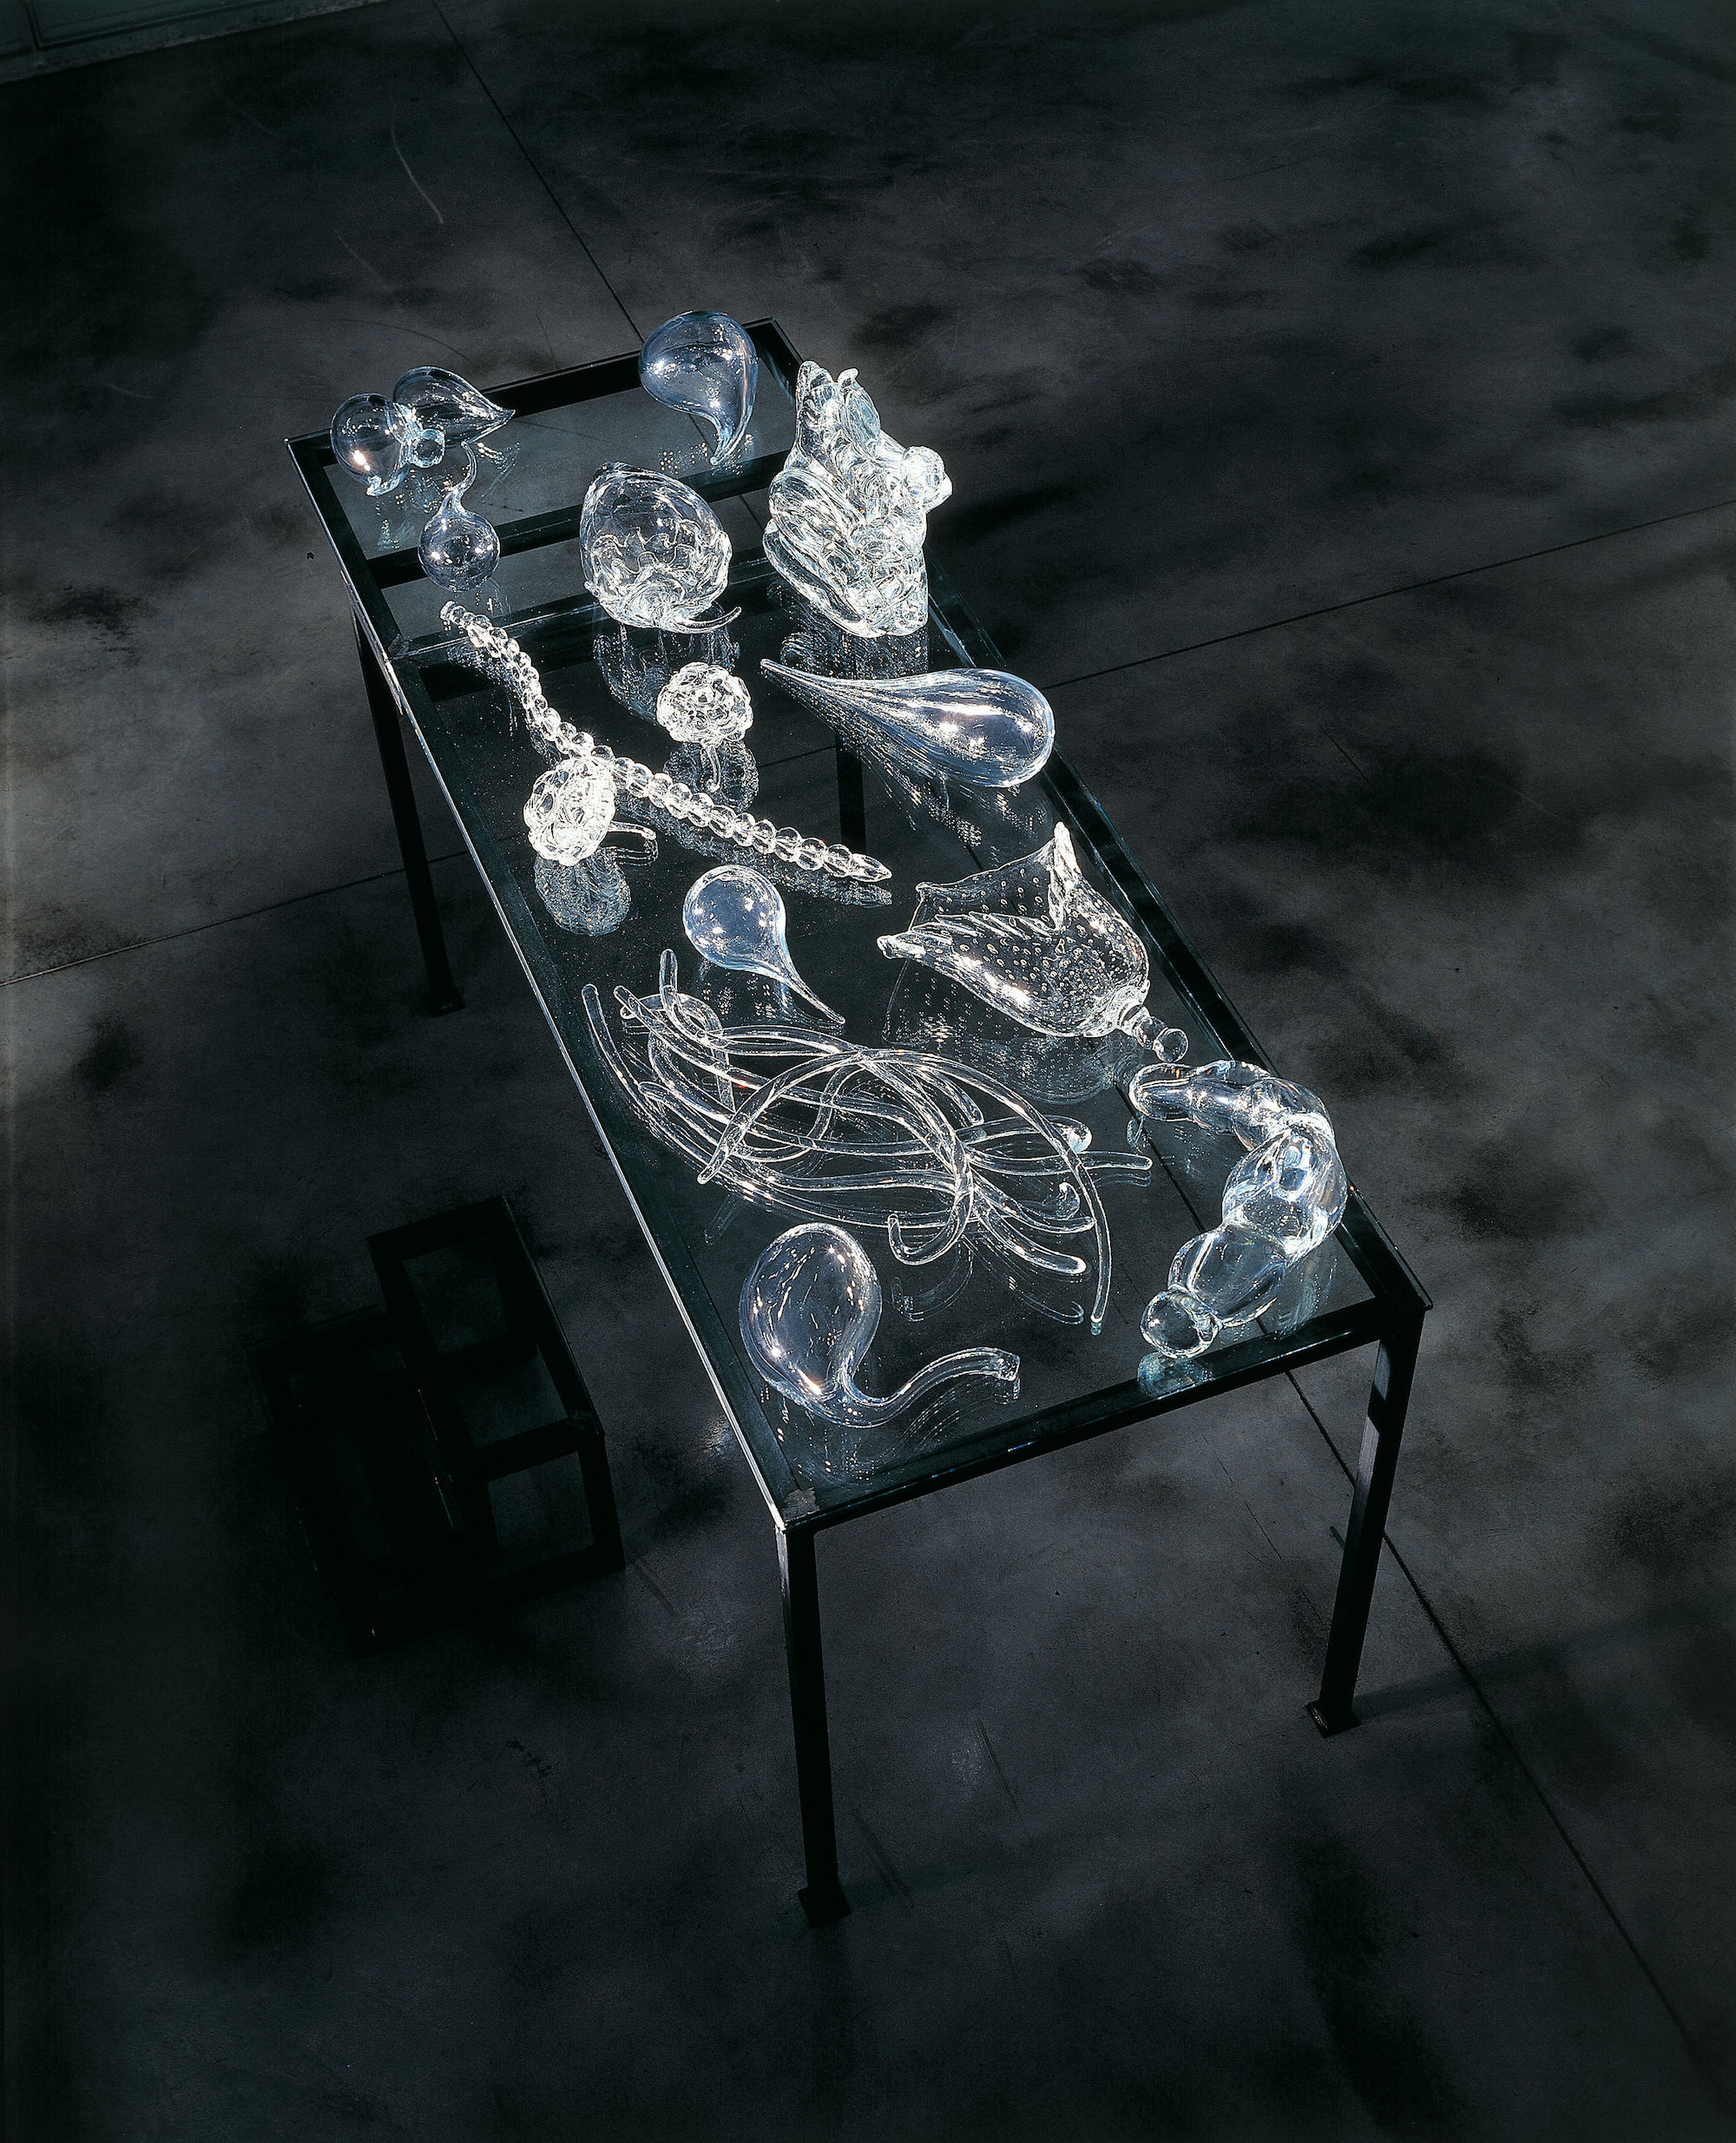 Chen Zhen, Crystal Landscape of Inner Body, 2000. Detail. Photo by GAM Torino Maurizio Elia. Courtesy of Galleria Continua, San Gimignano/Beijing/Les Moulins/Havana and © 2019 Artists Rights Society (ARS), New York / ADAGP, Paris.